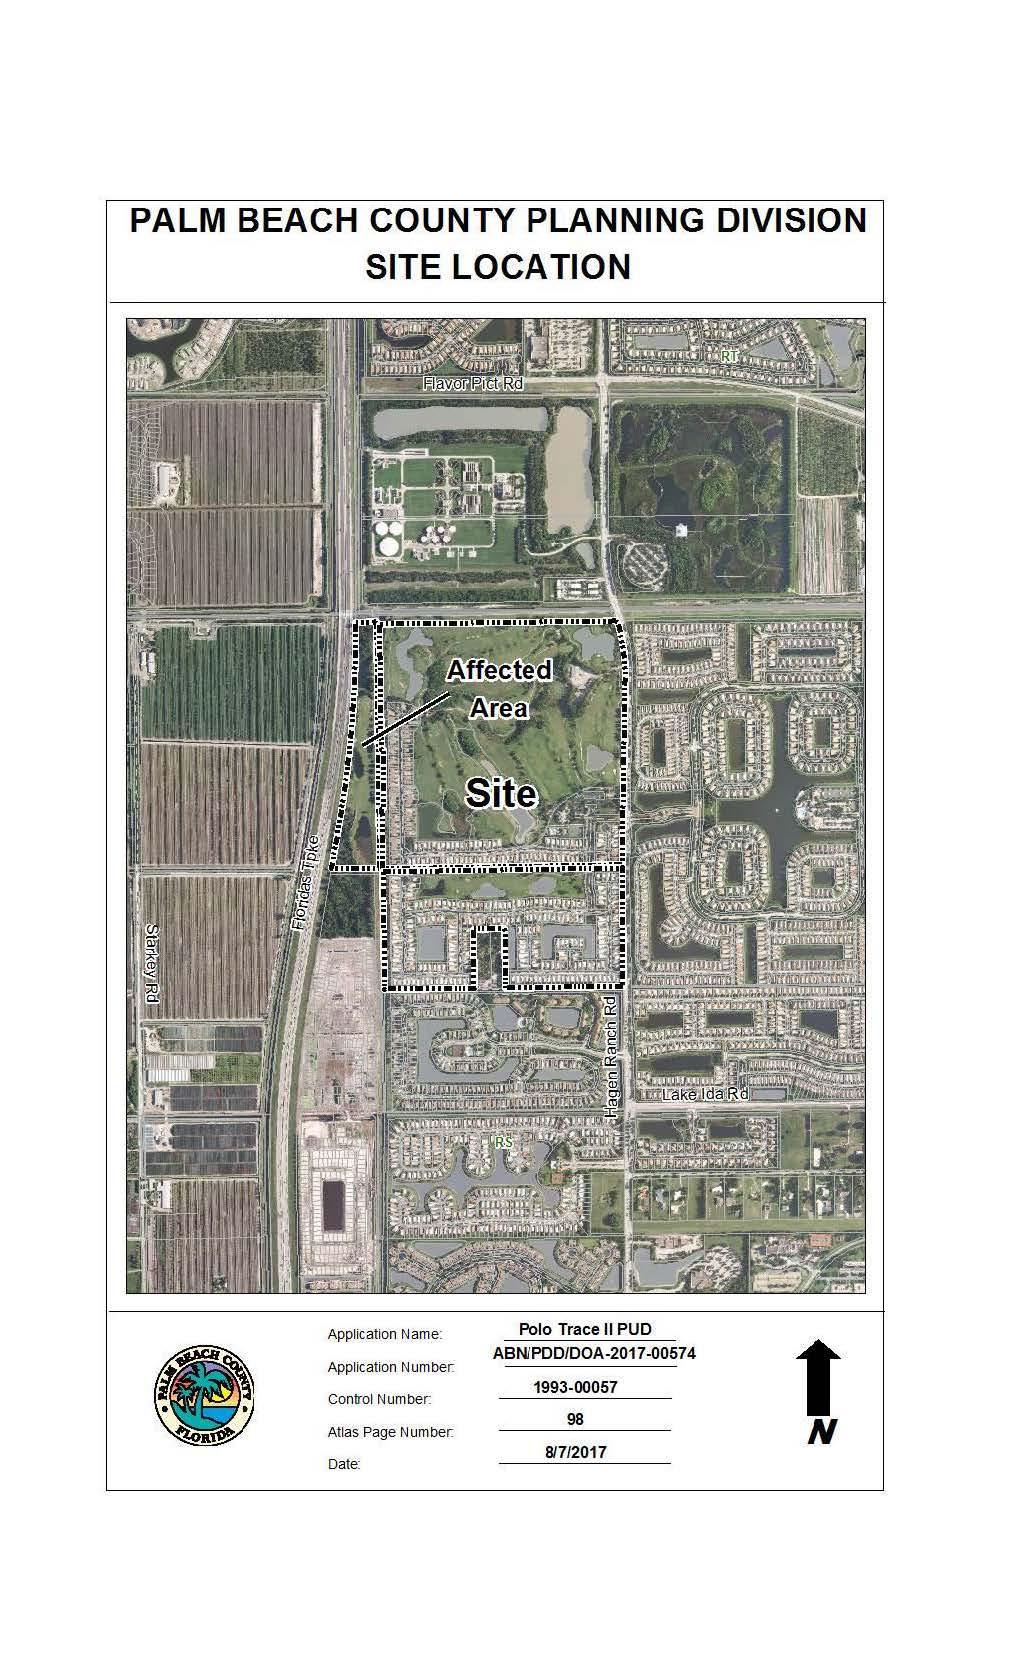 Figure 3: Aerial PALM BEACH COUNTY PLANNING DIVISION SITE LOCATION Application Nam e: Application Number: Control Number: